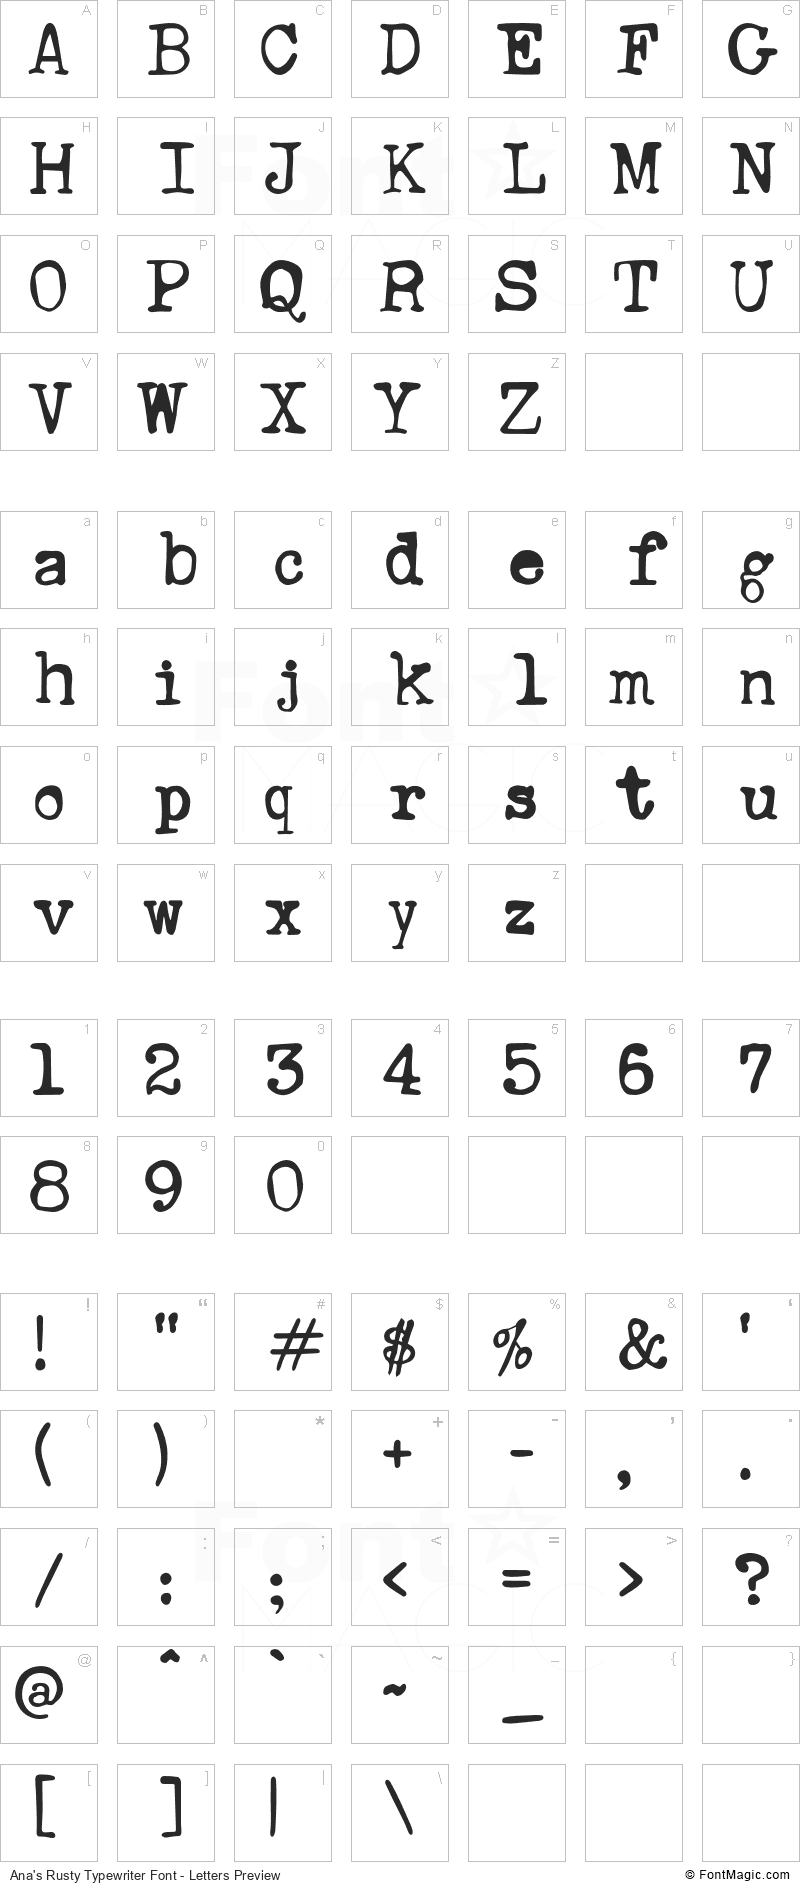 Ana’s Rusty Typewriter Font - All Latters Preview Chart